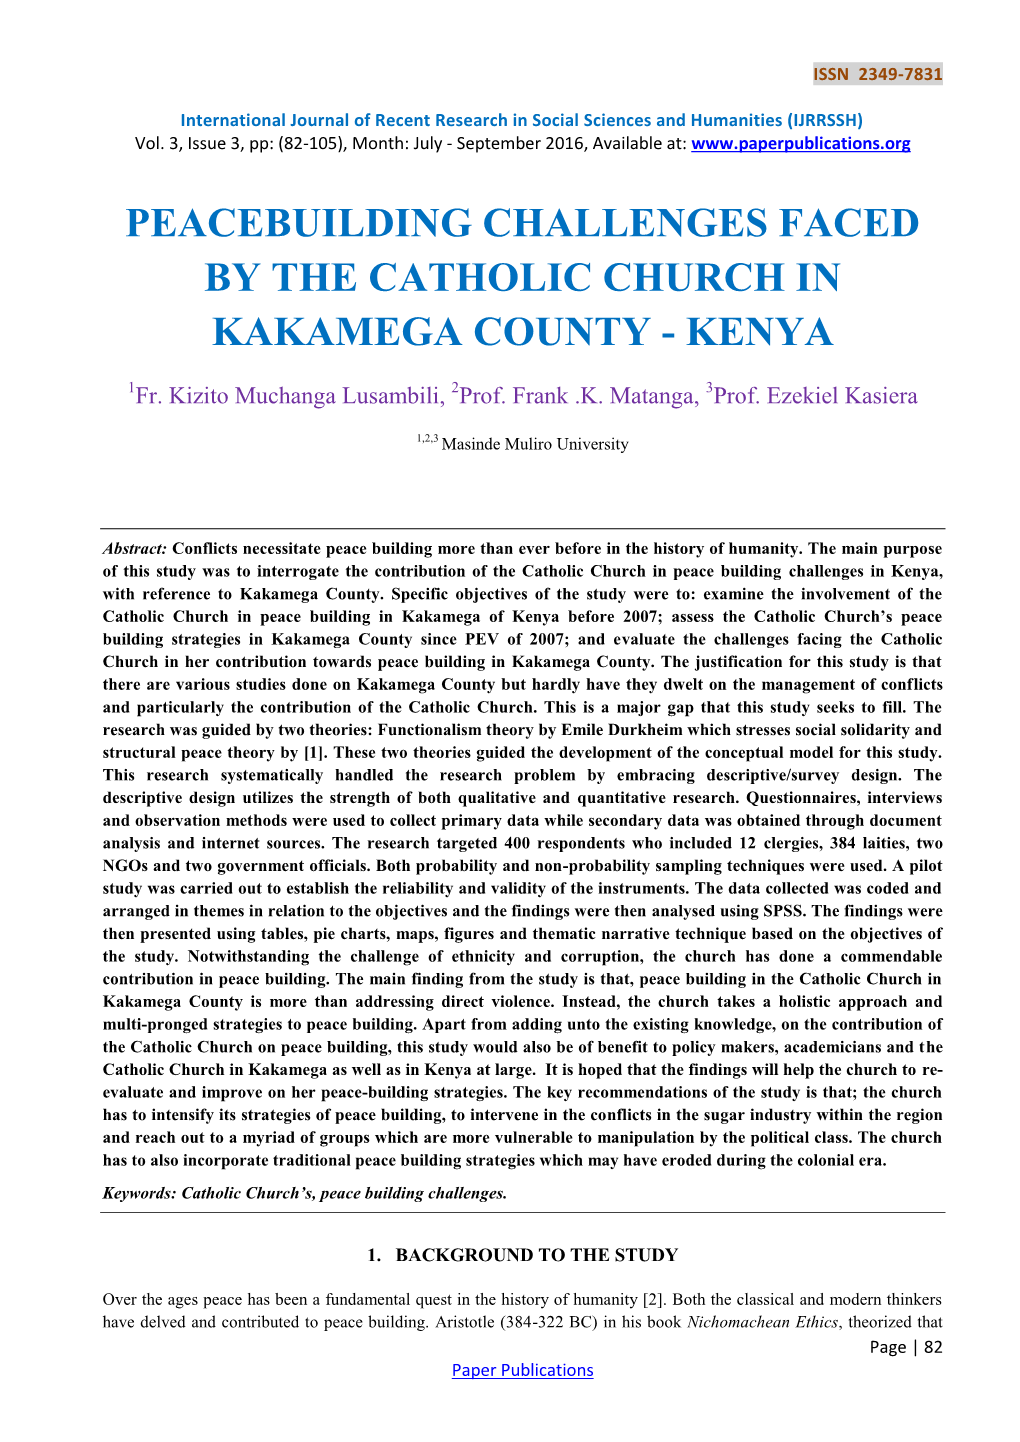 Peacebuilding Challenges Faced by the Catholic Church in Kakamega County - Kenya